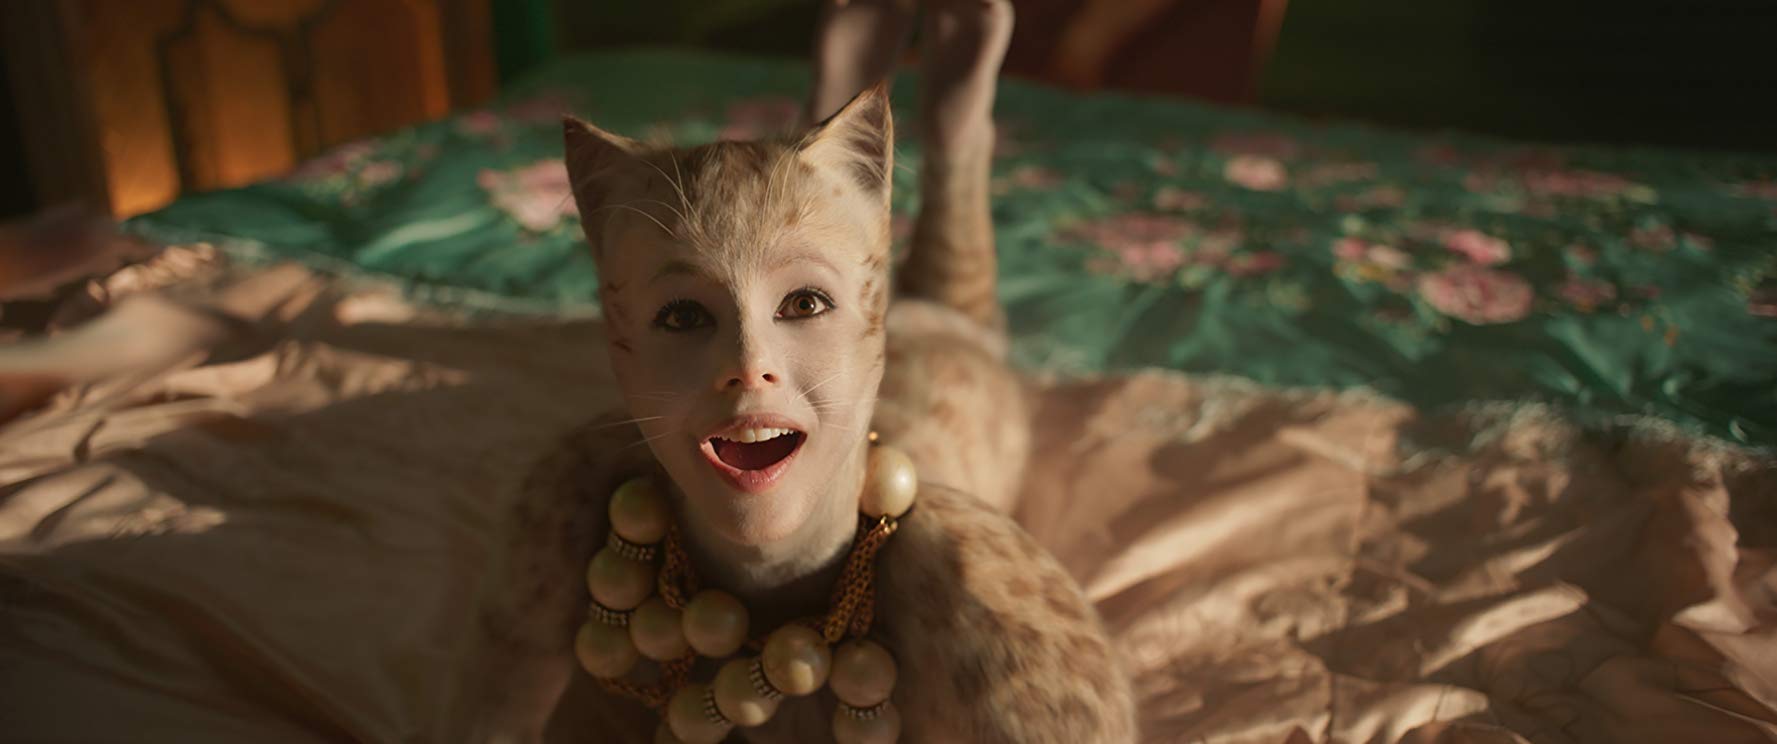 cats-review-img03_20191229